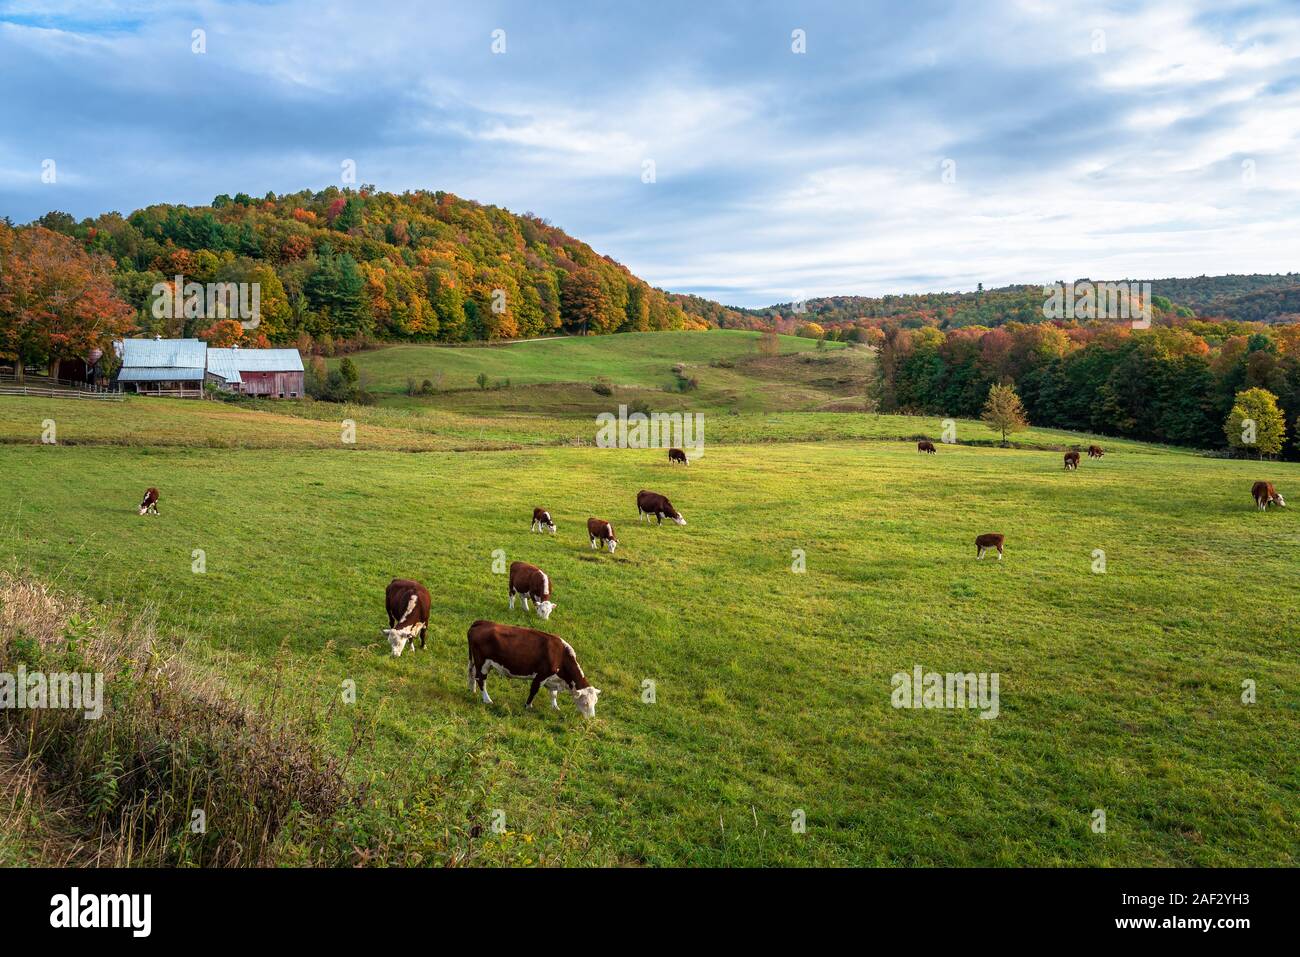 Cattle grazing in a grassy field in Vermont on a cloudy autumn morning. Beautiful autumn colours. Stock Photo